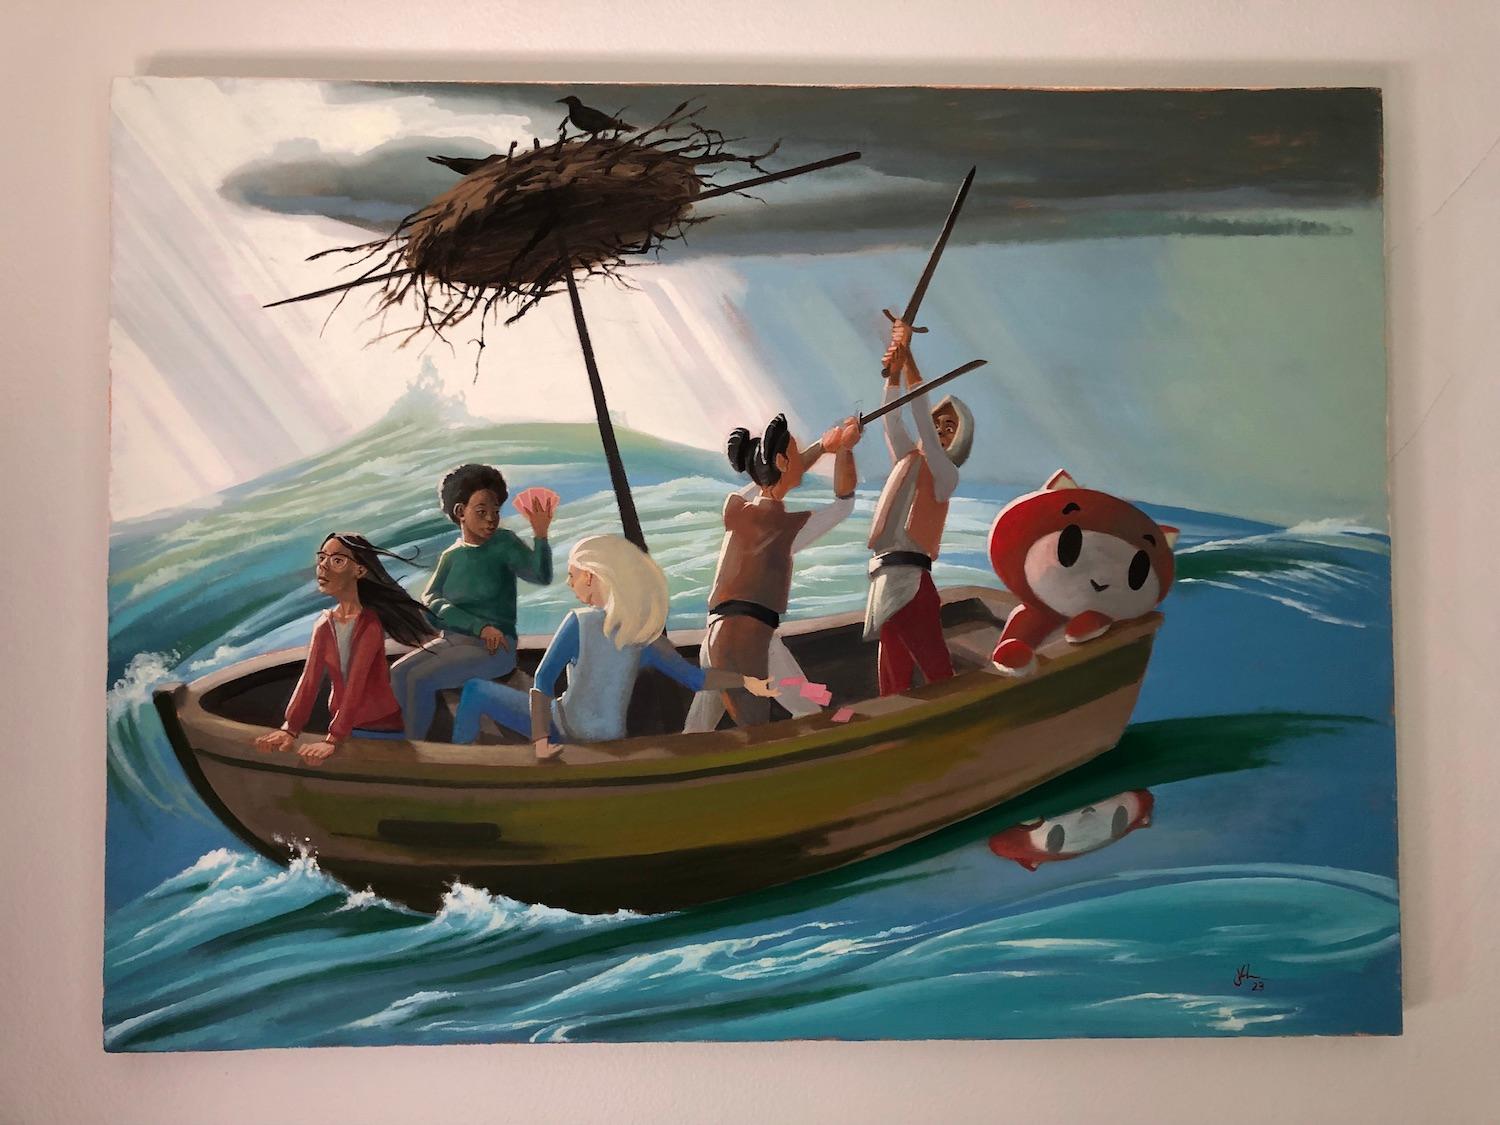 <p>Artist Comments<br>A group of friends sail in a small ship that wallows atop rolling seas. Some engage in various activities to keep their spirits high while the lookouts have an eye on the horizon. The artwork steers the viewer into a vivid